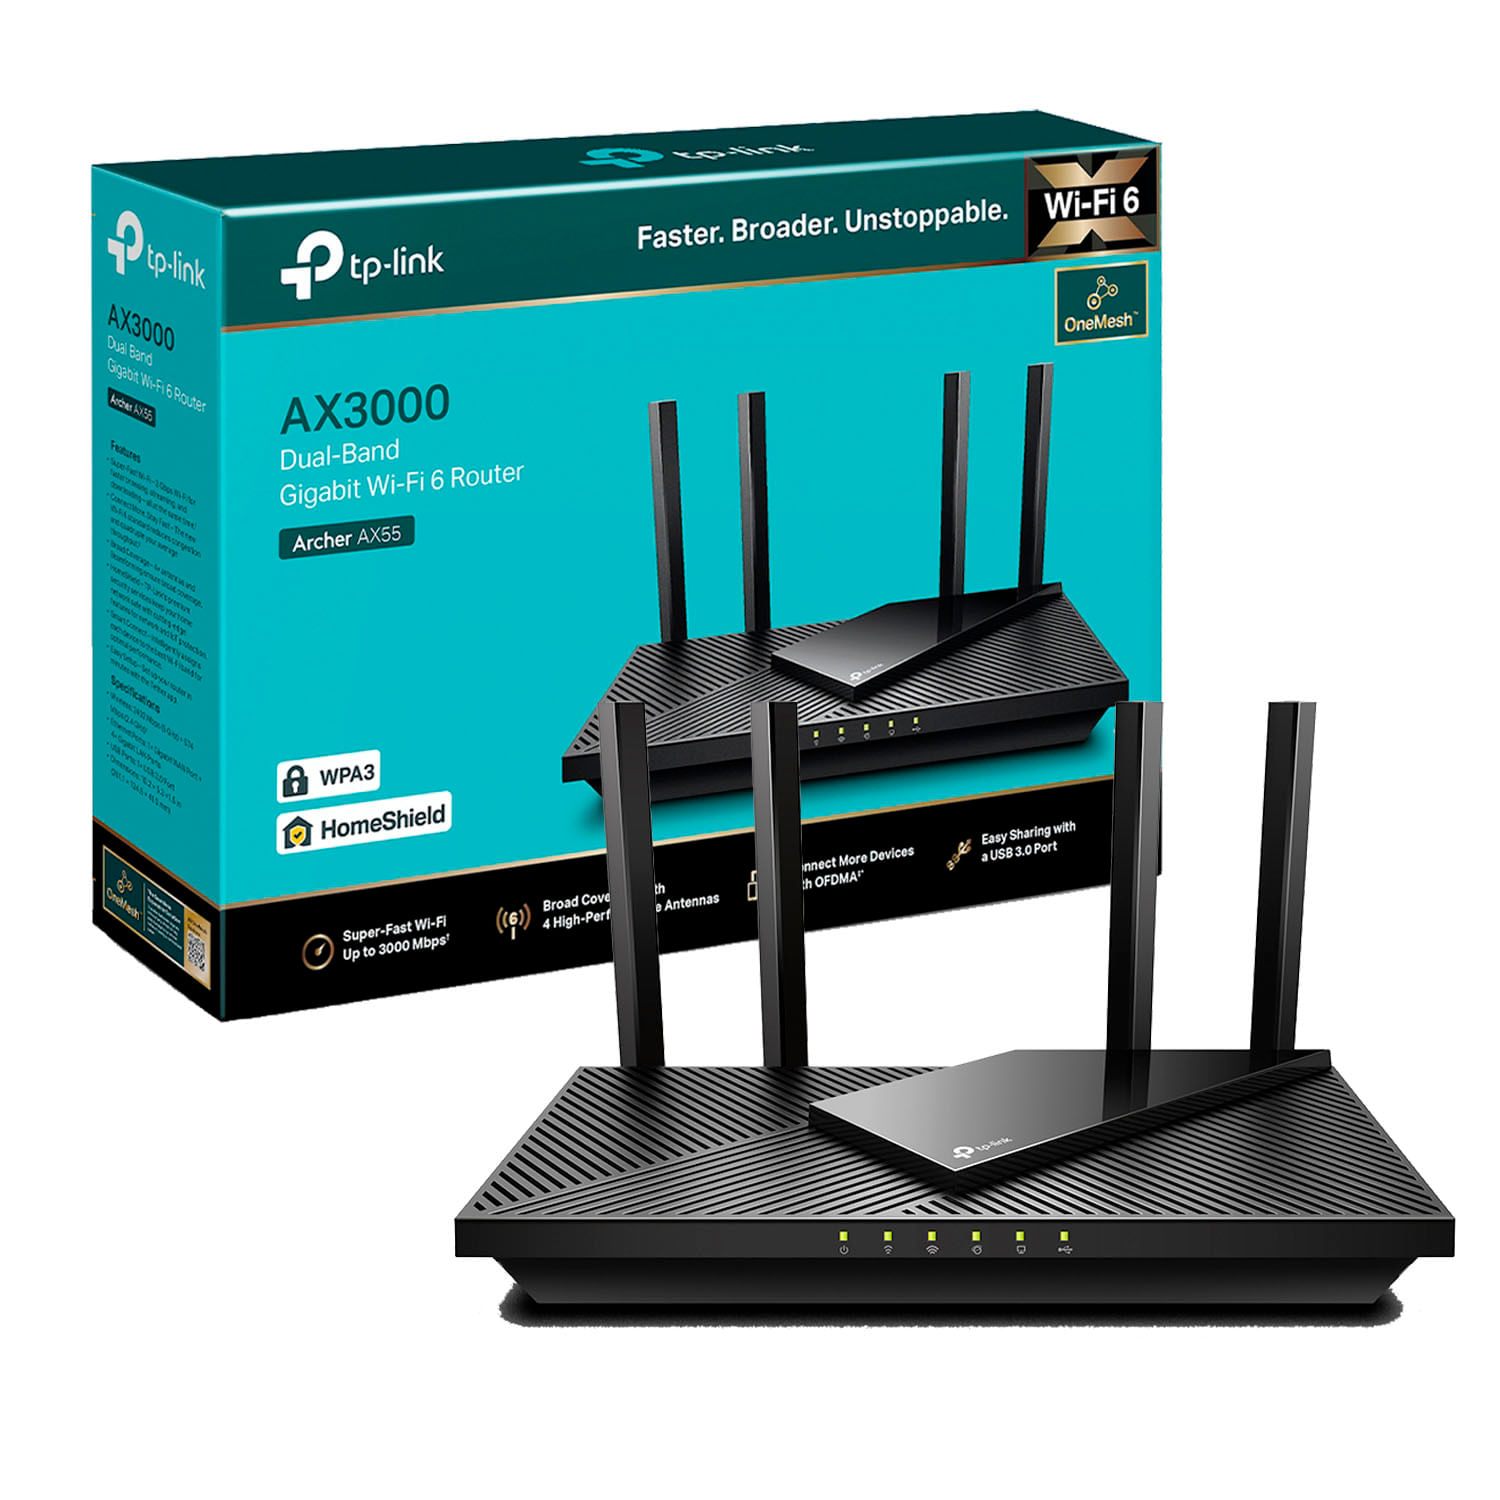 Router Inalámbrico Archer Ax55 Tp Link Ax3000 Wi Fi 6 Dual Band